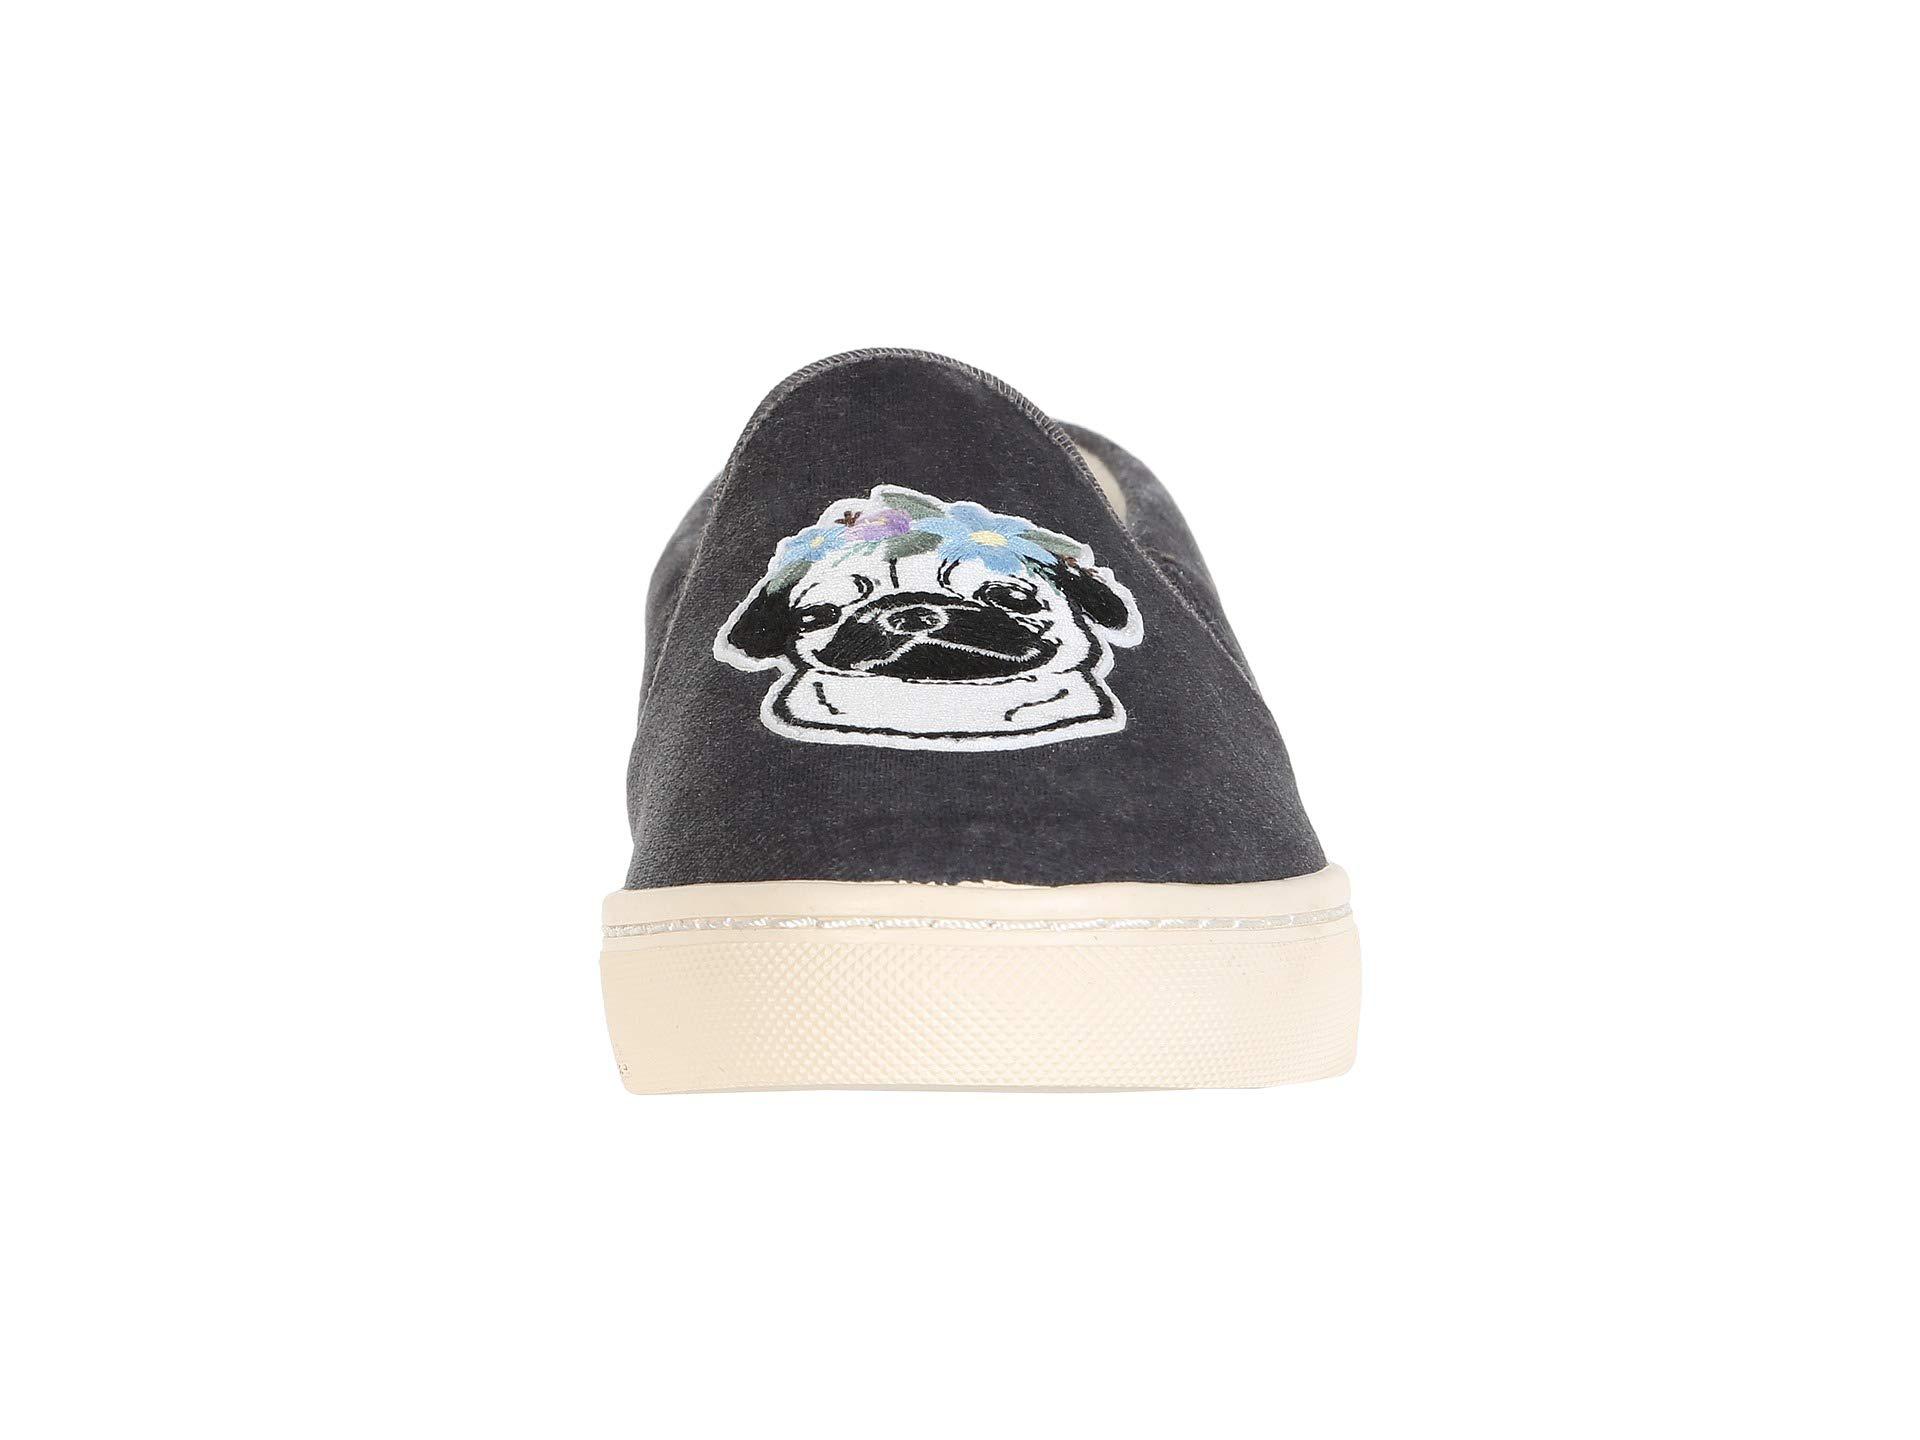 soludos pug sneakers